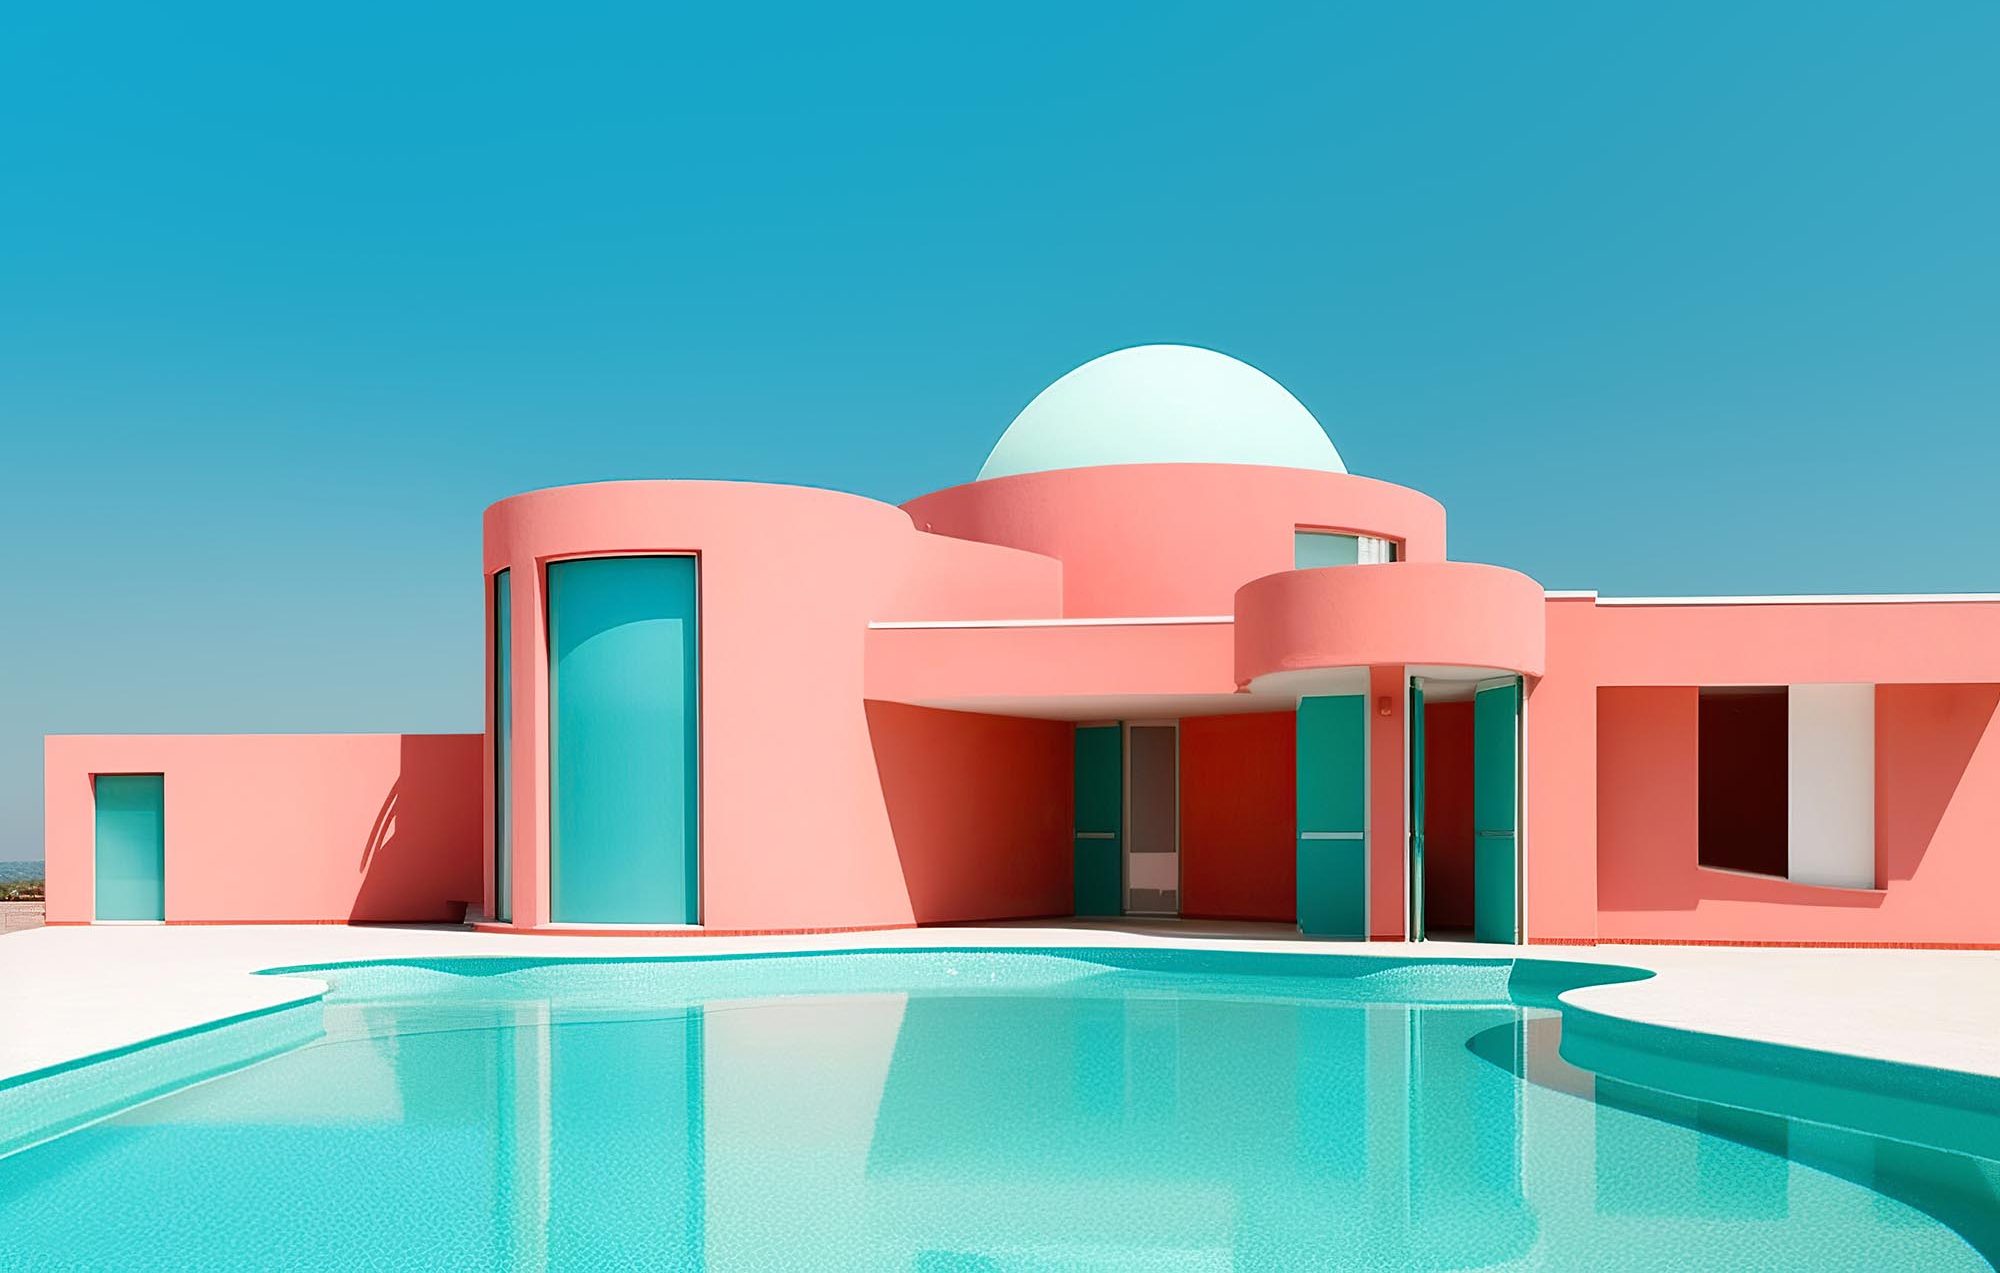 Swimming pool on sunny day. Summer minimalist architecture background.